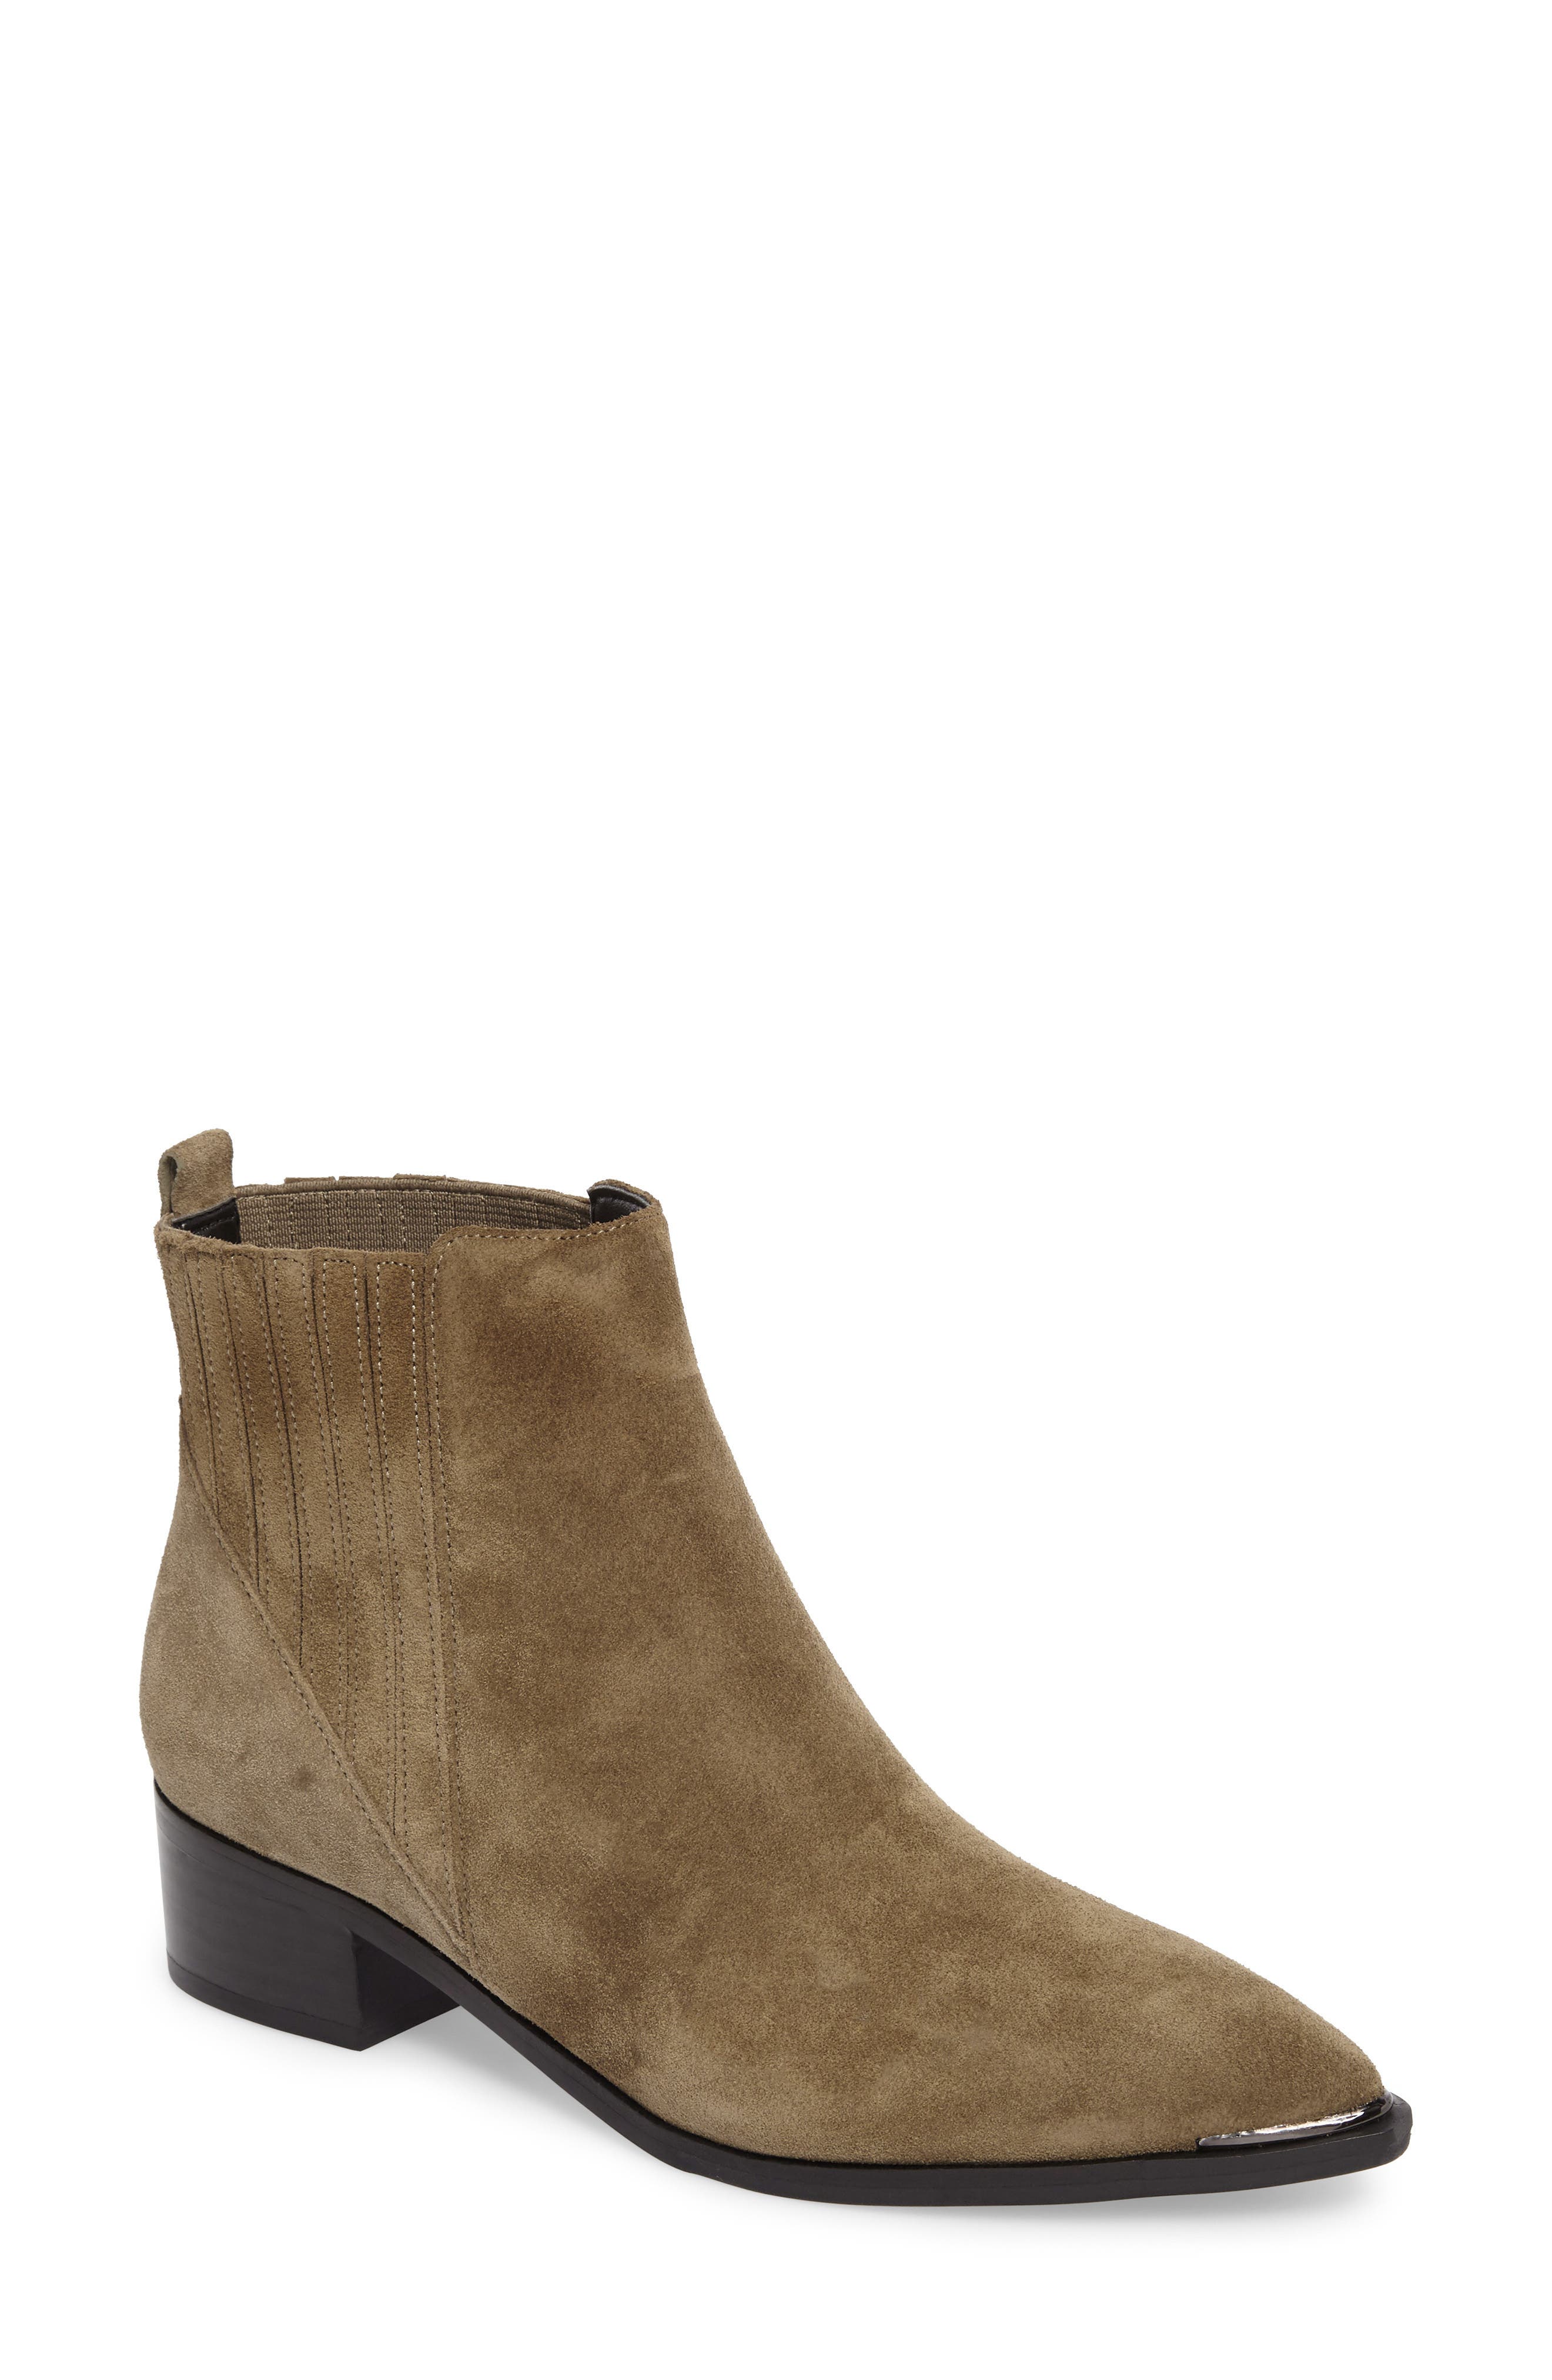 marc fisher yommi chelsea bootie